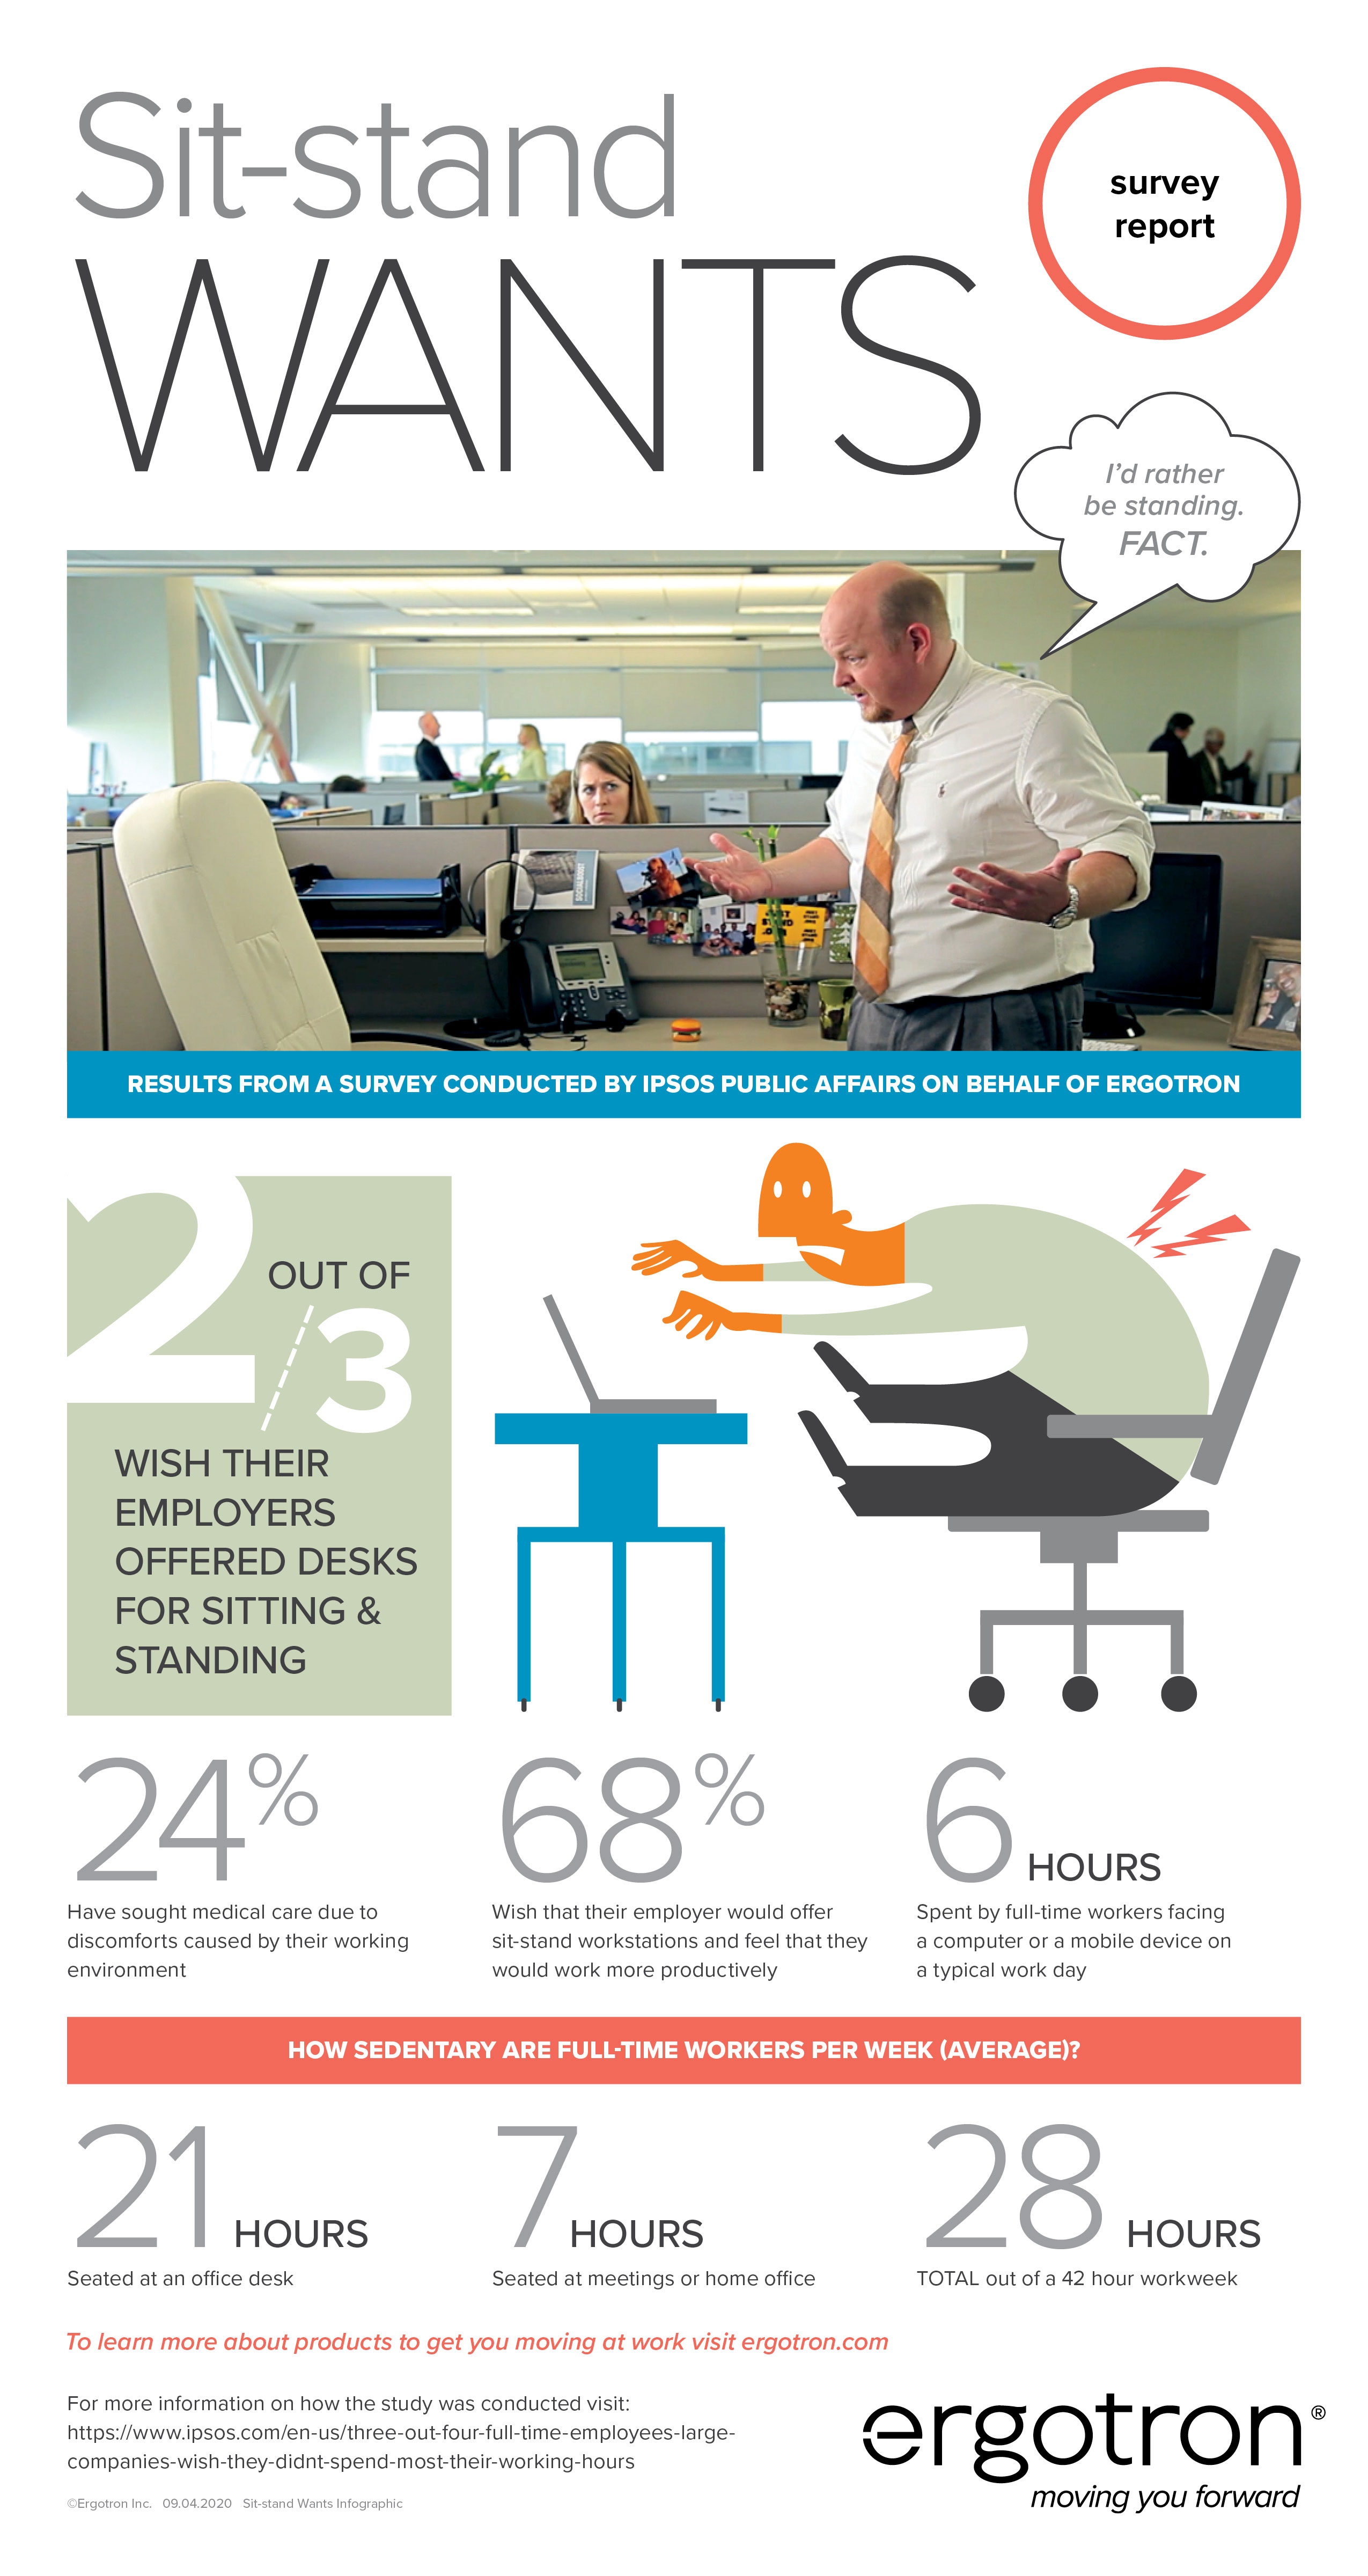 Sit-Stand Wants: Workers Want Choice infographic